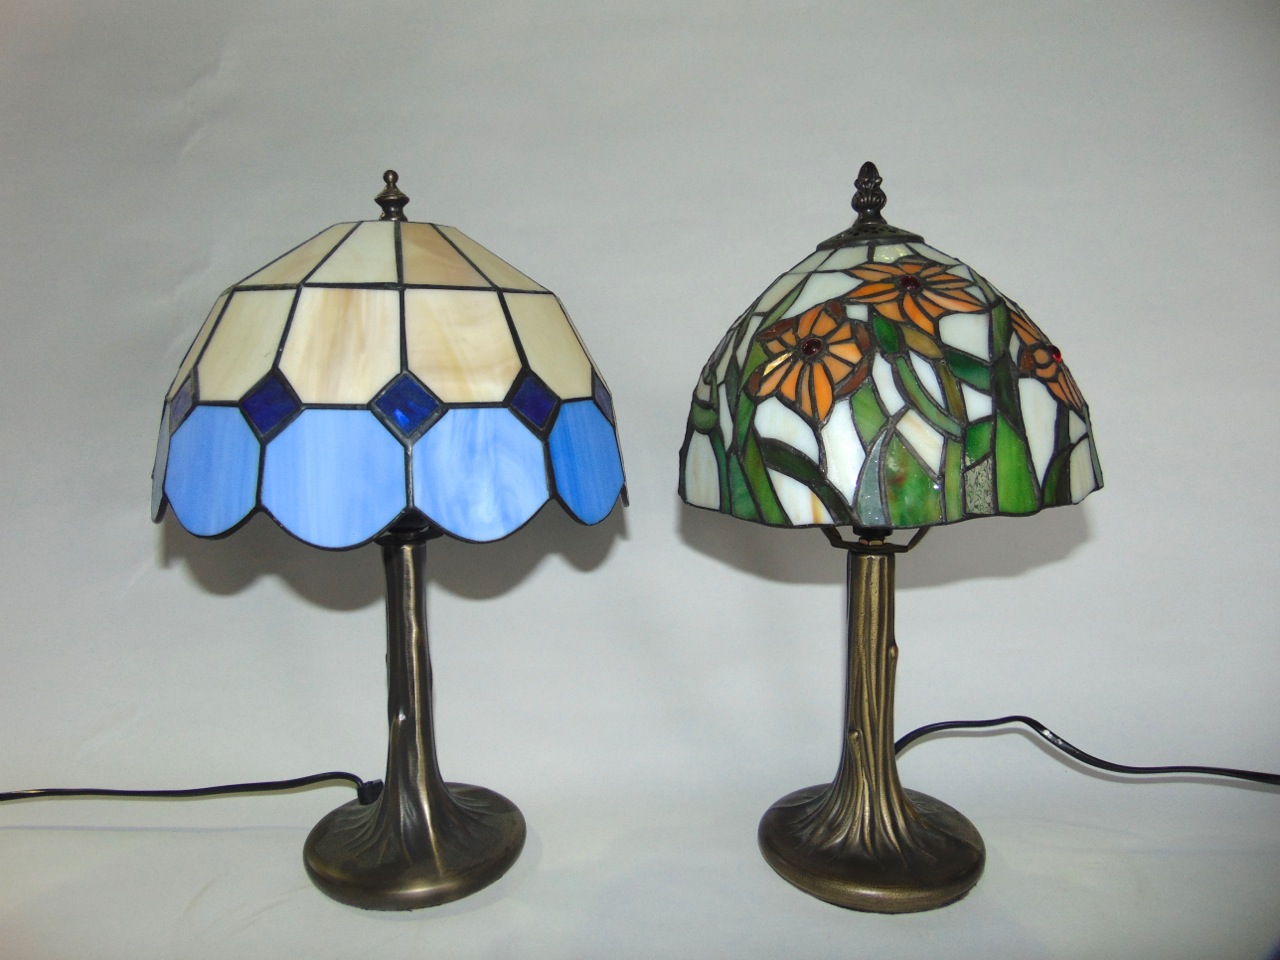 Two reproduction table lamps with leaded glass shades raised on simulated trunk like stems